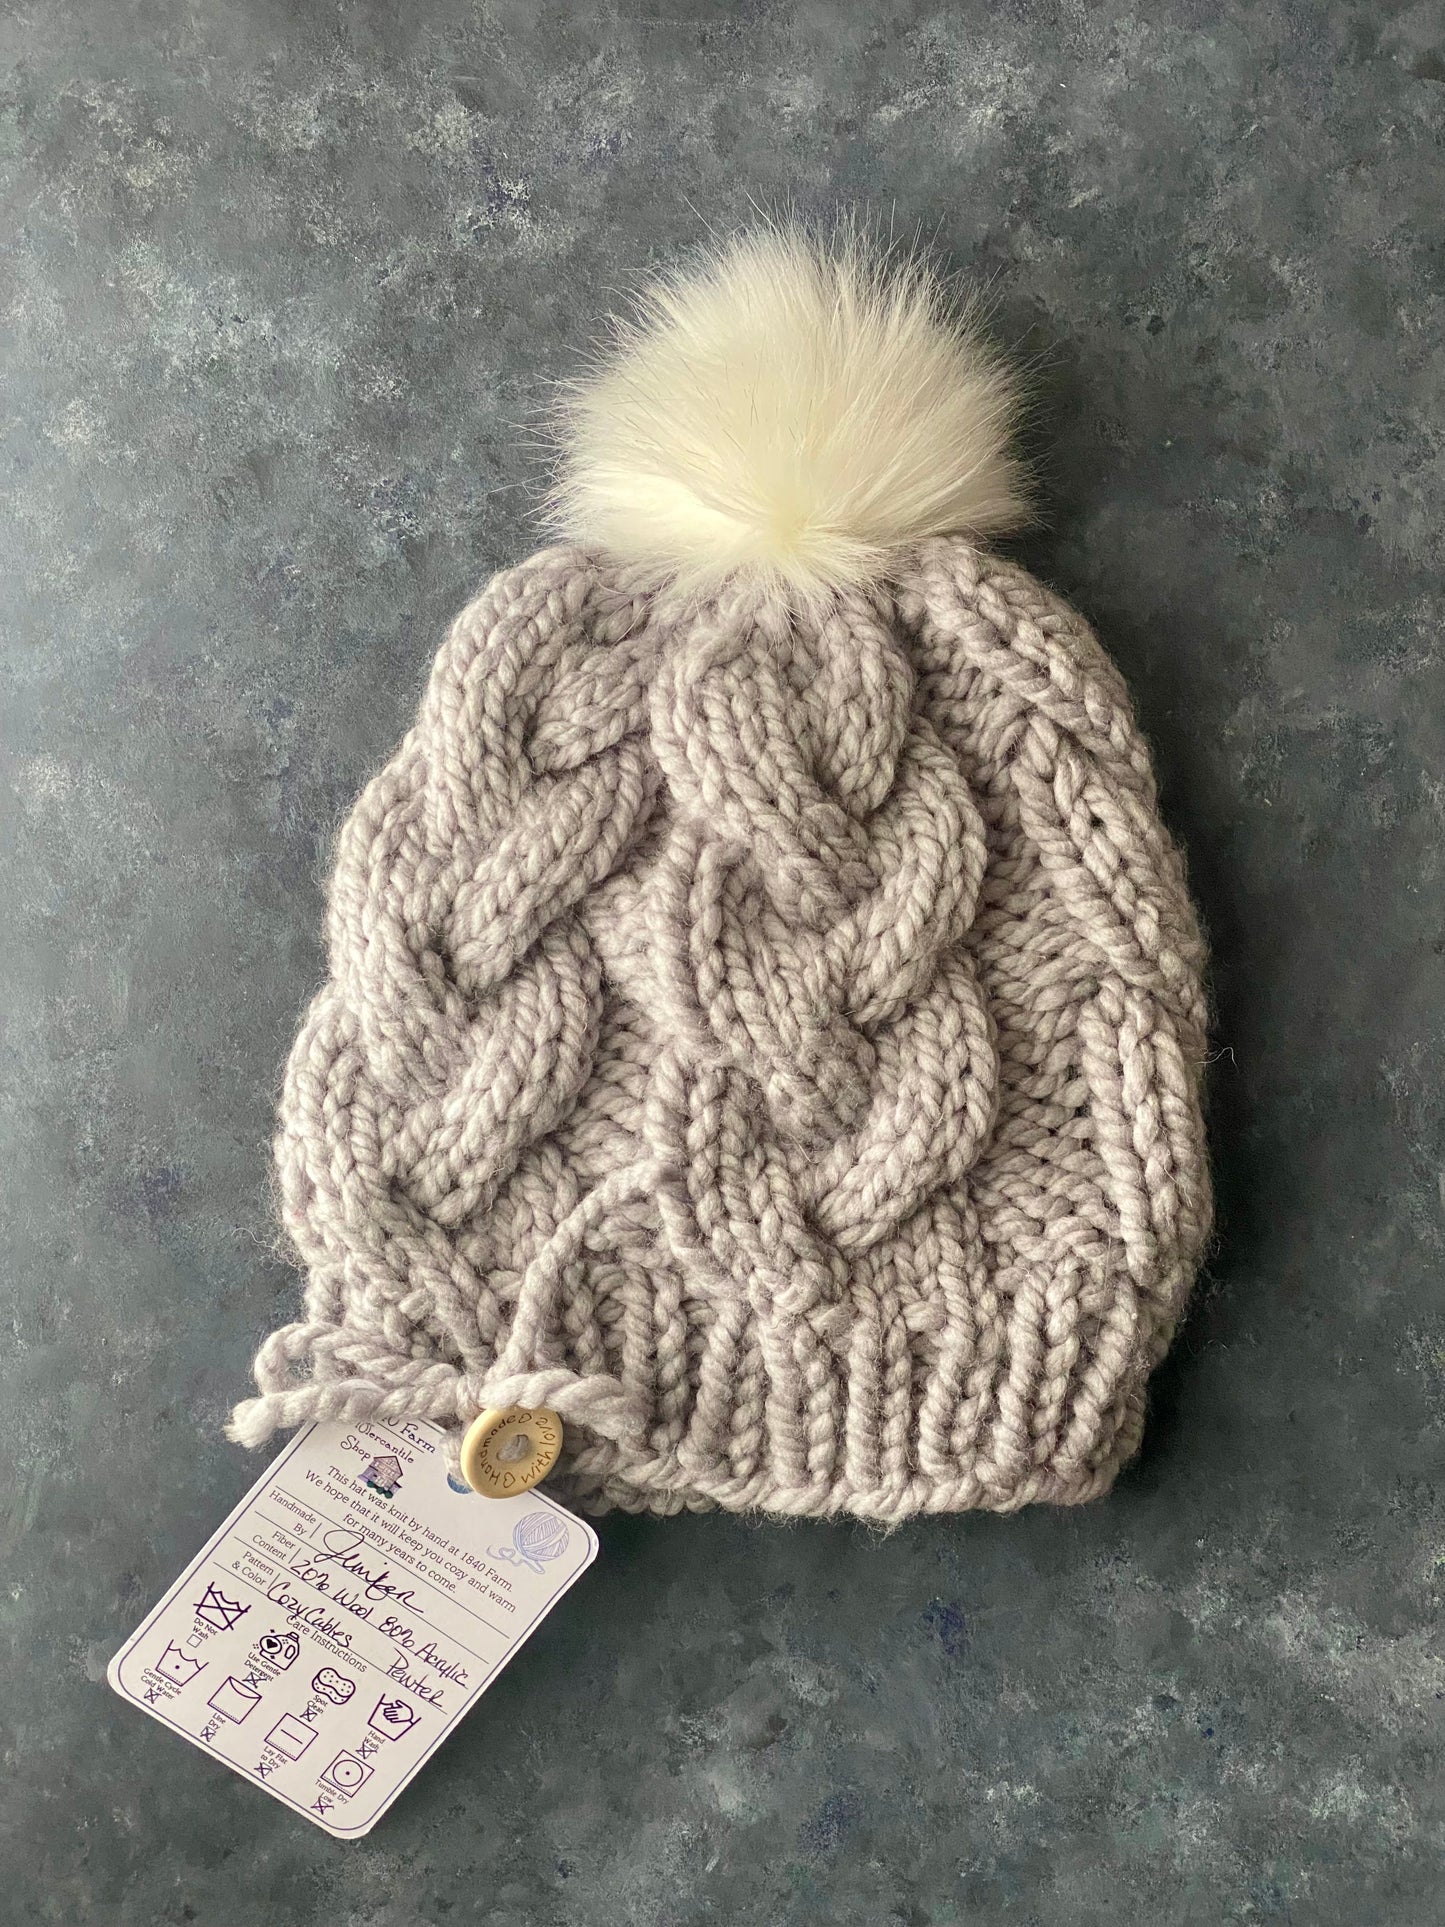 PomPom Add-on to Cozy Cables Hat